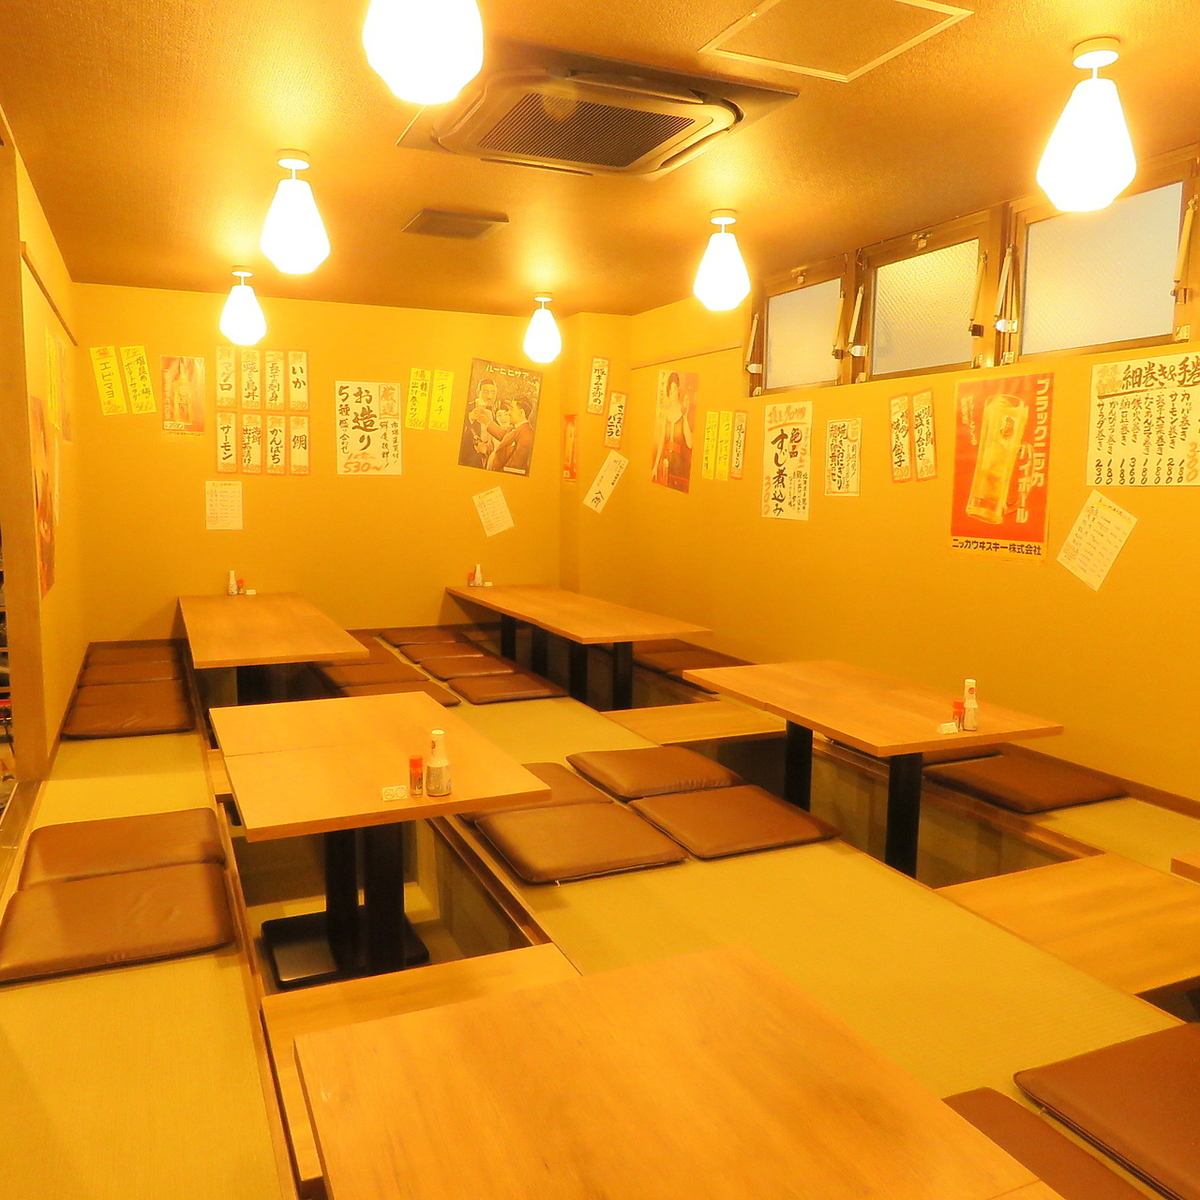 Tatami mats and table seats are available! Recommended for family dinners